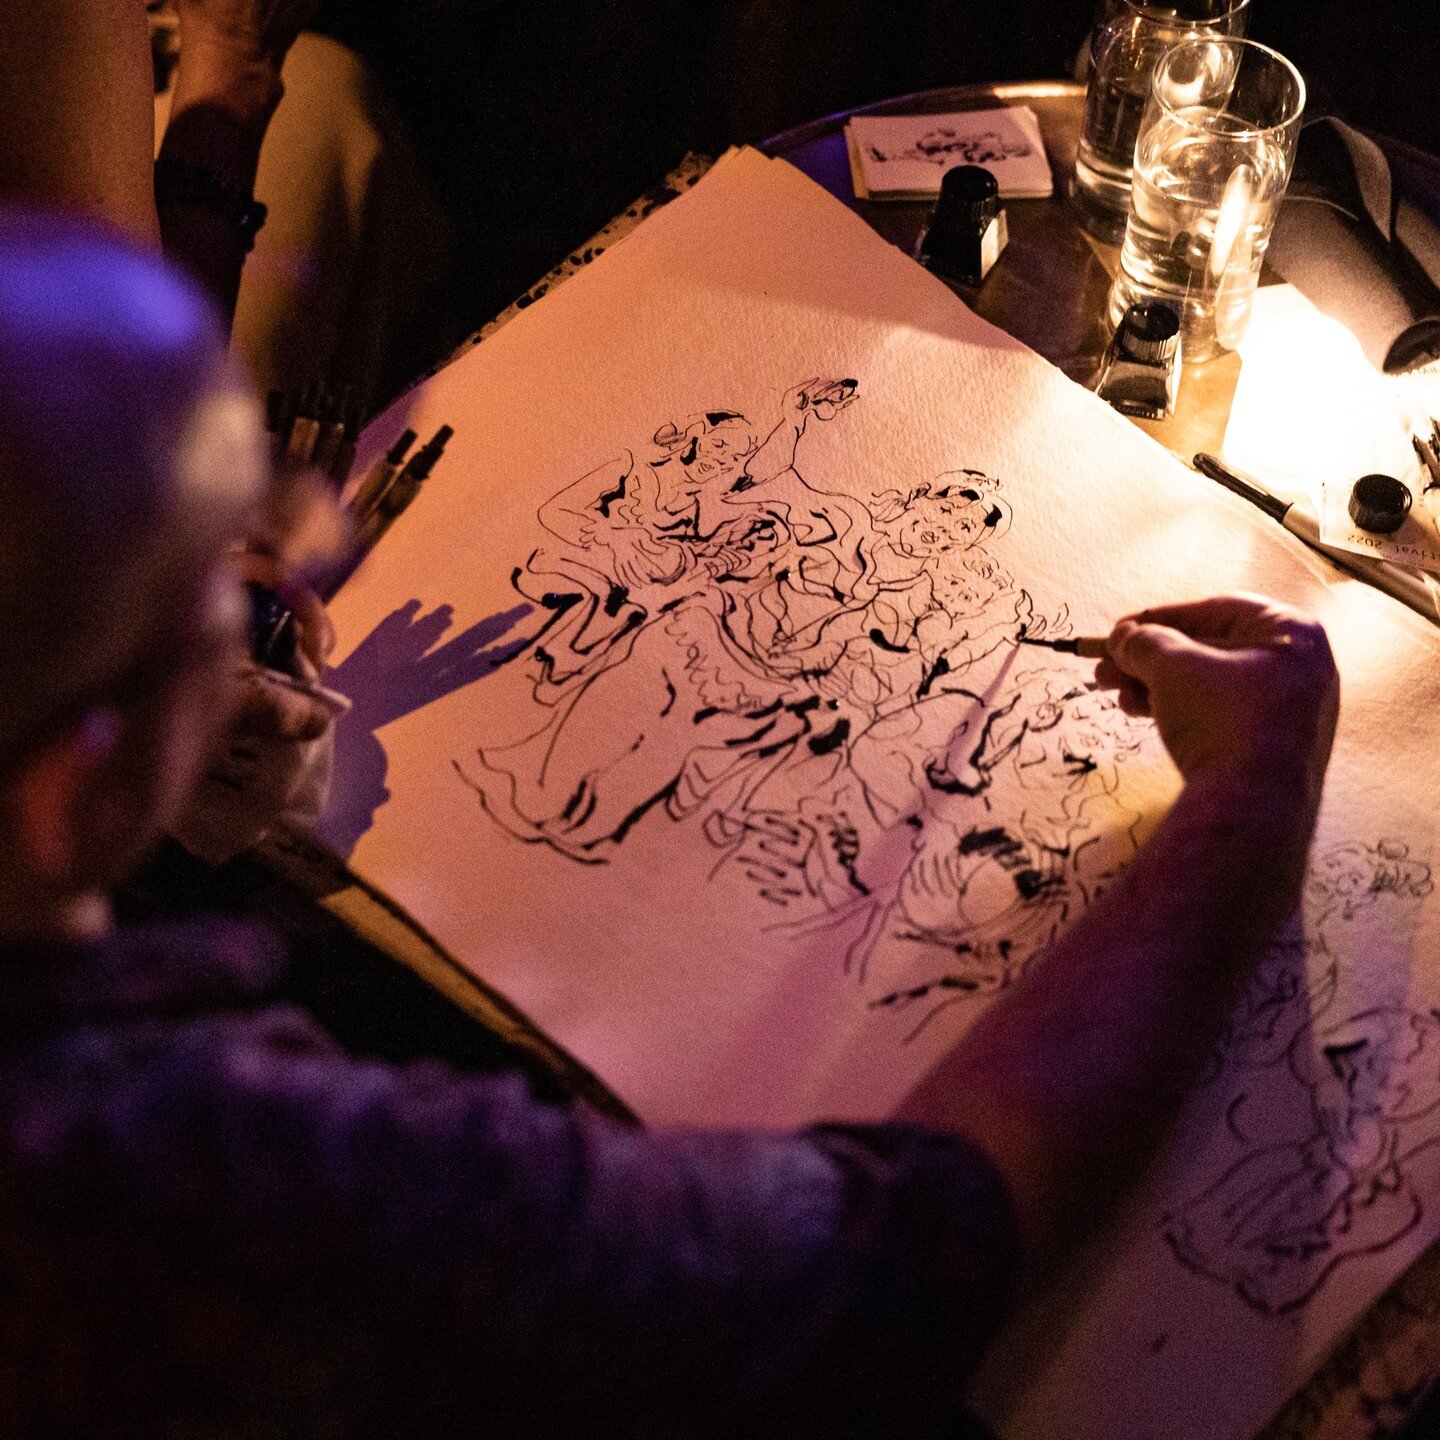 Shoutout to phenomenal artist @jonathanglassart for joining us at Habibi Festival Night 1 to sketch @nouramintseymali and @bnat_elhouariyat + @wardadance. So amazing to watch his process of responding in real time to the music to create these beautif